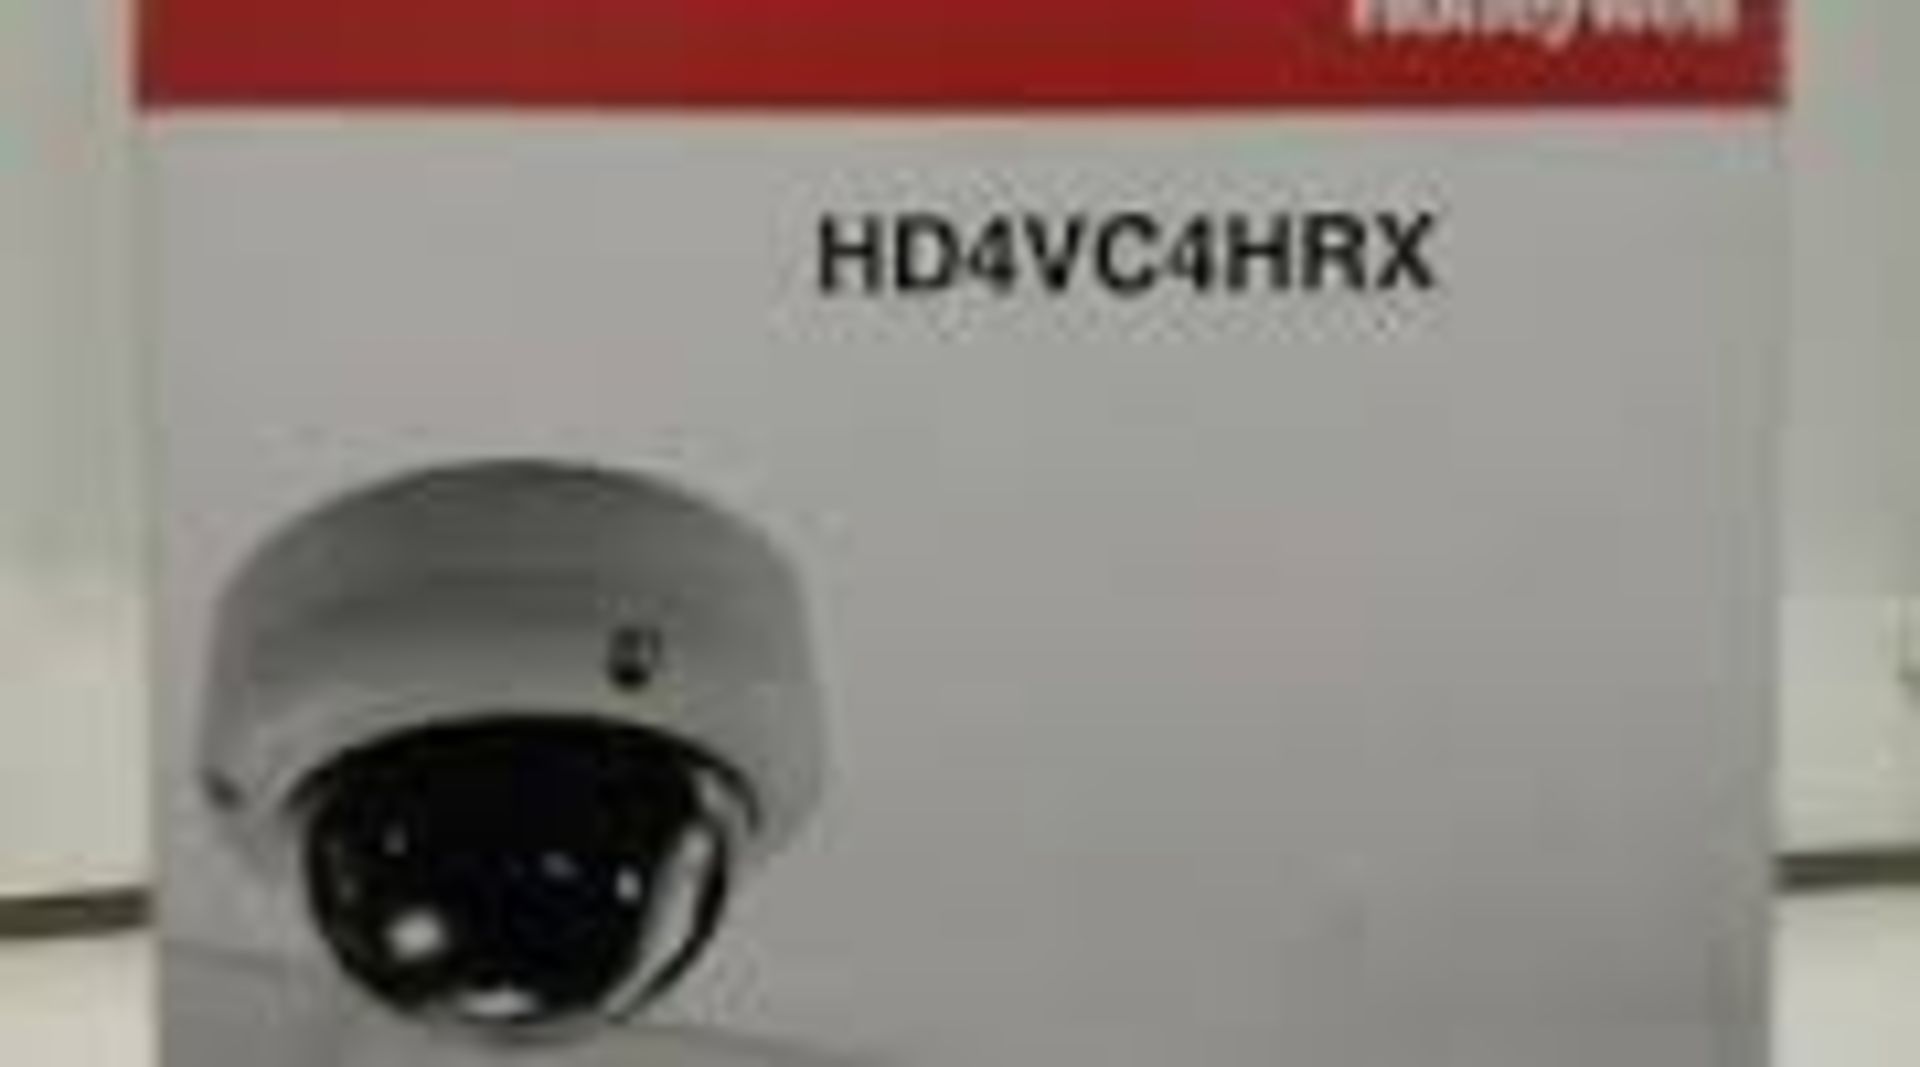 Honeywell HD4VC4HRX indoor color dome camera - Ex-warehouse stock - Boxed - Image 2 of 2